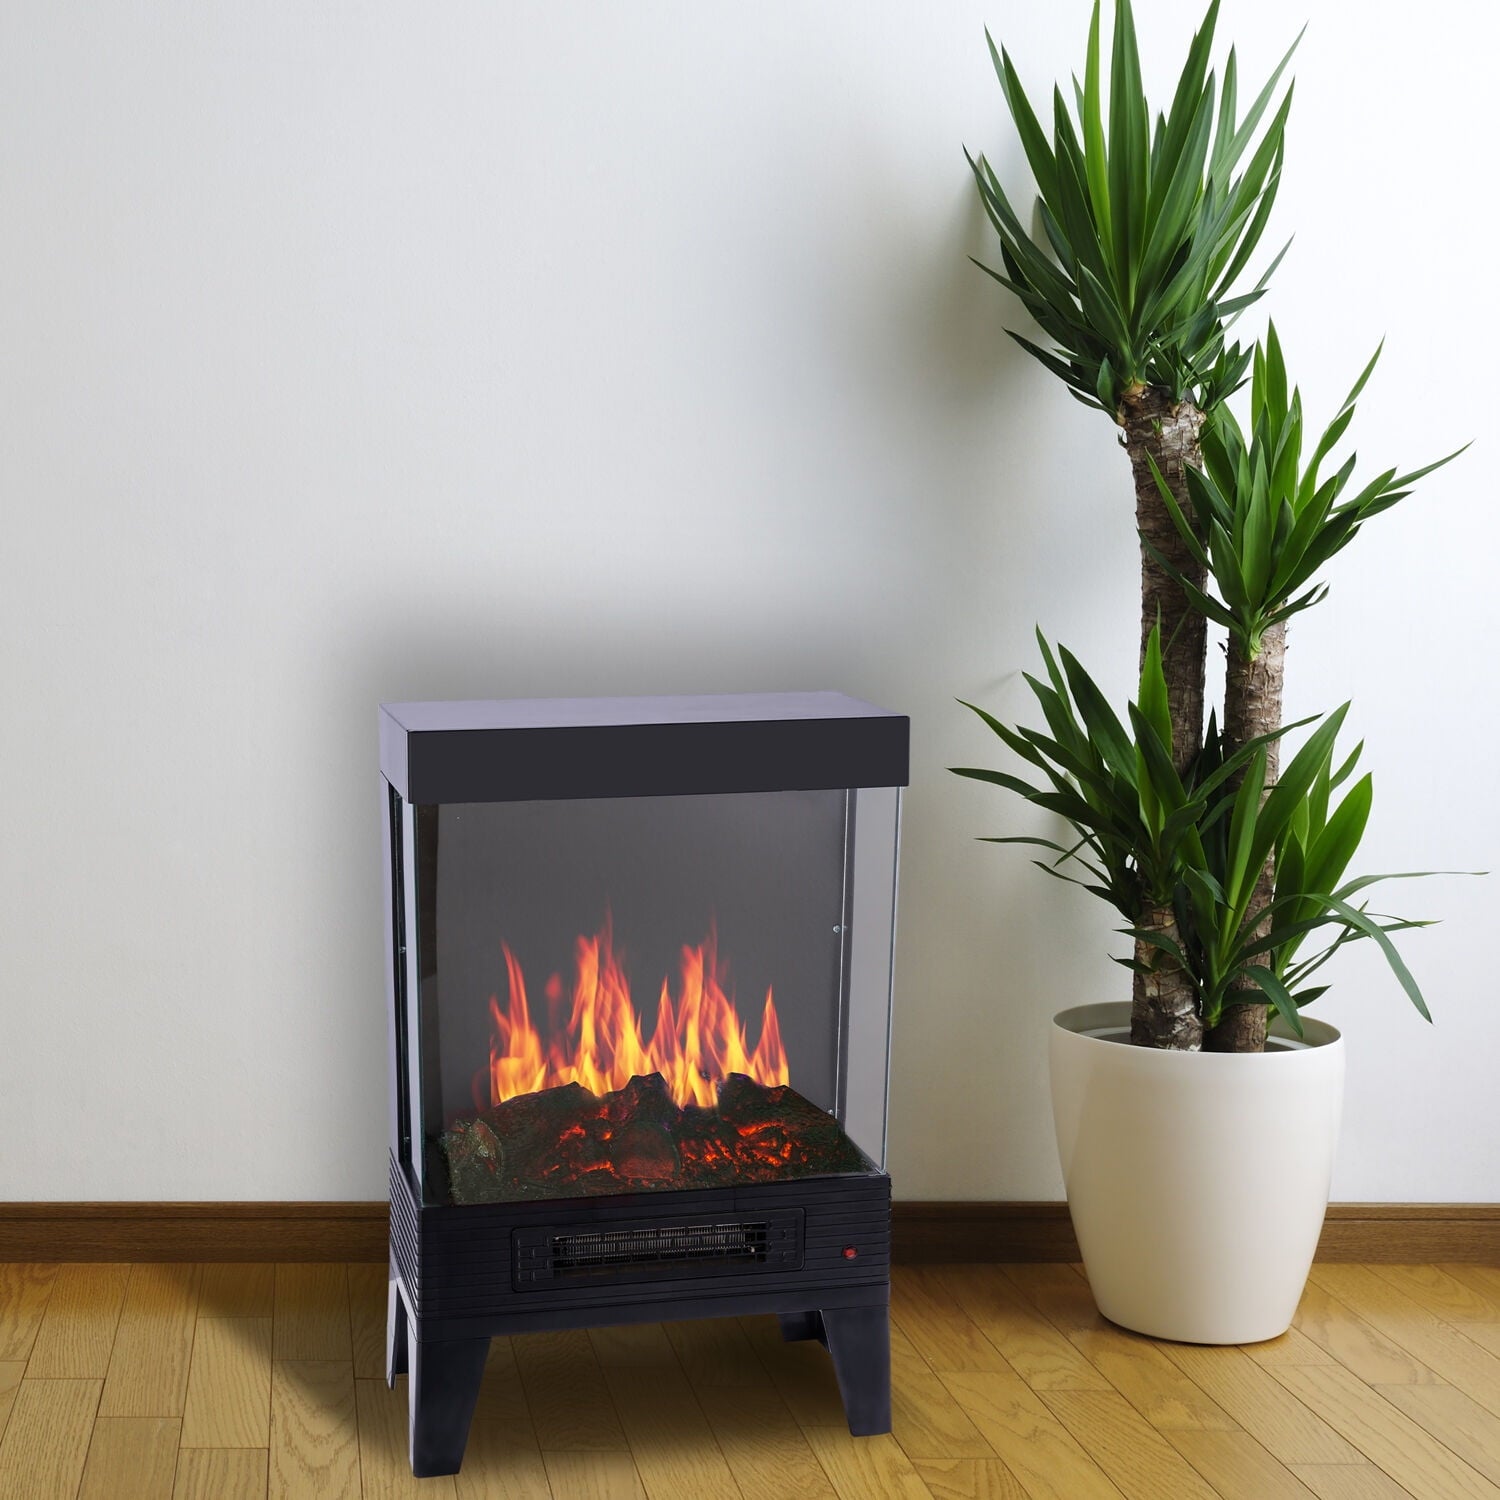 LifeSmart Contemporary Heater Stove with 3-Sided Flame View | 2 Heat Settings | Realistic Flame With or Without Heat | Indoor Supplemental Heating for Living Room, Basement, Garage, Office | HT1923